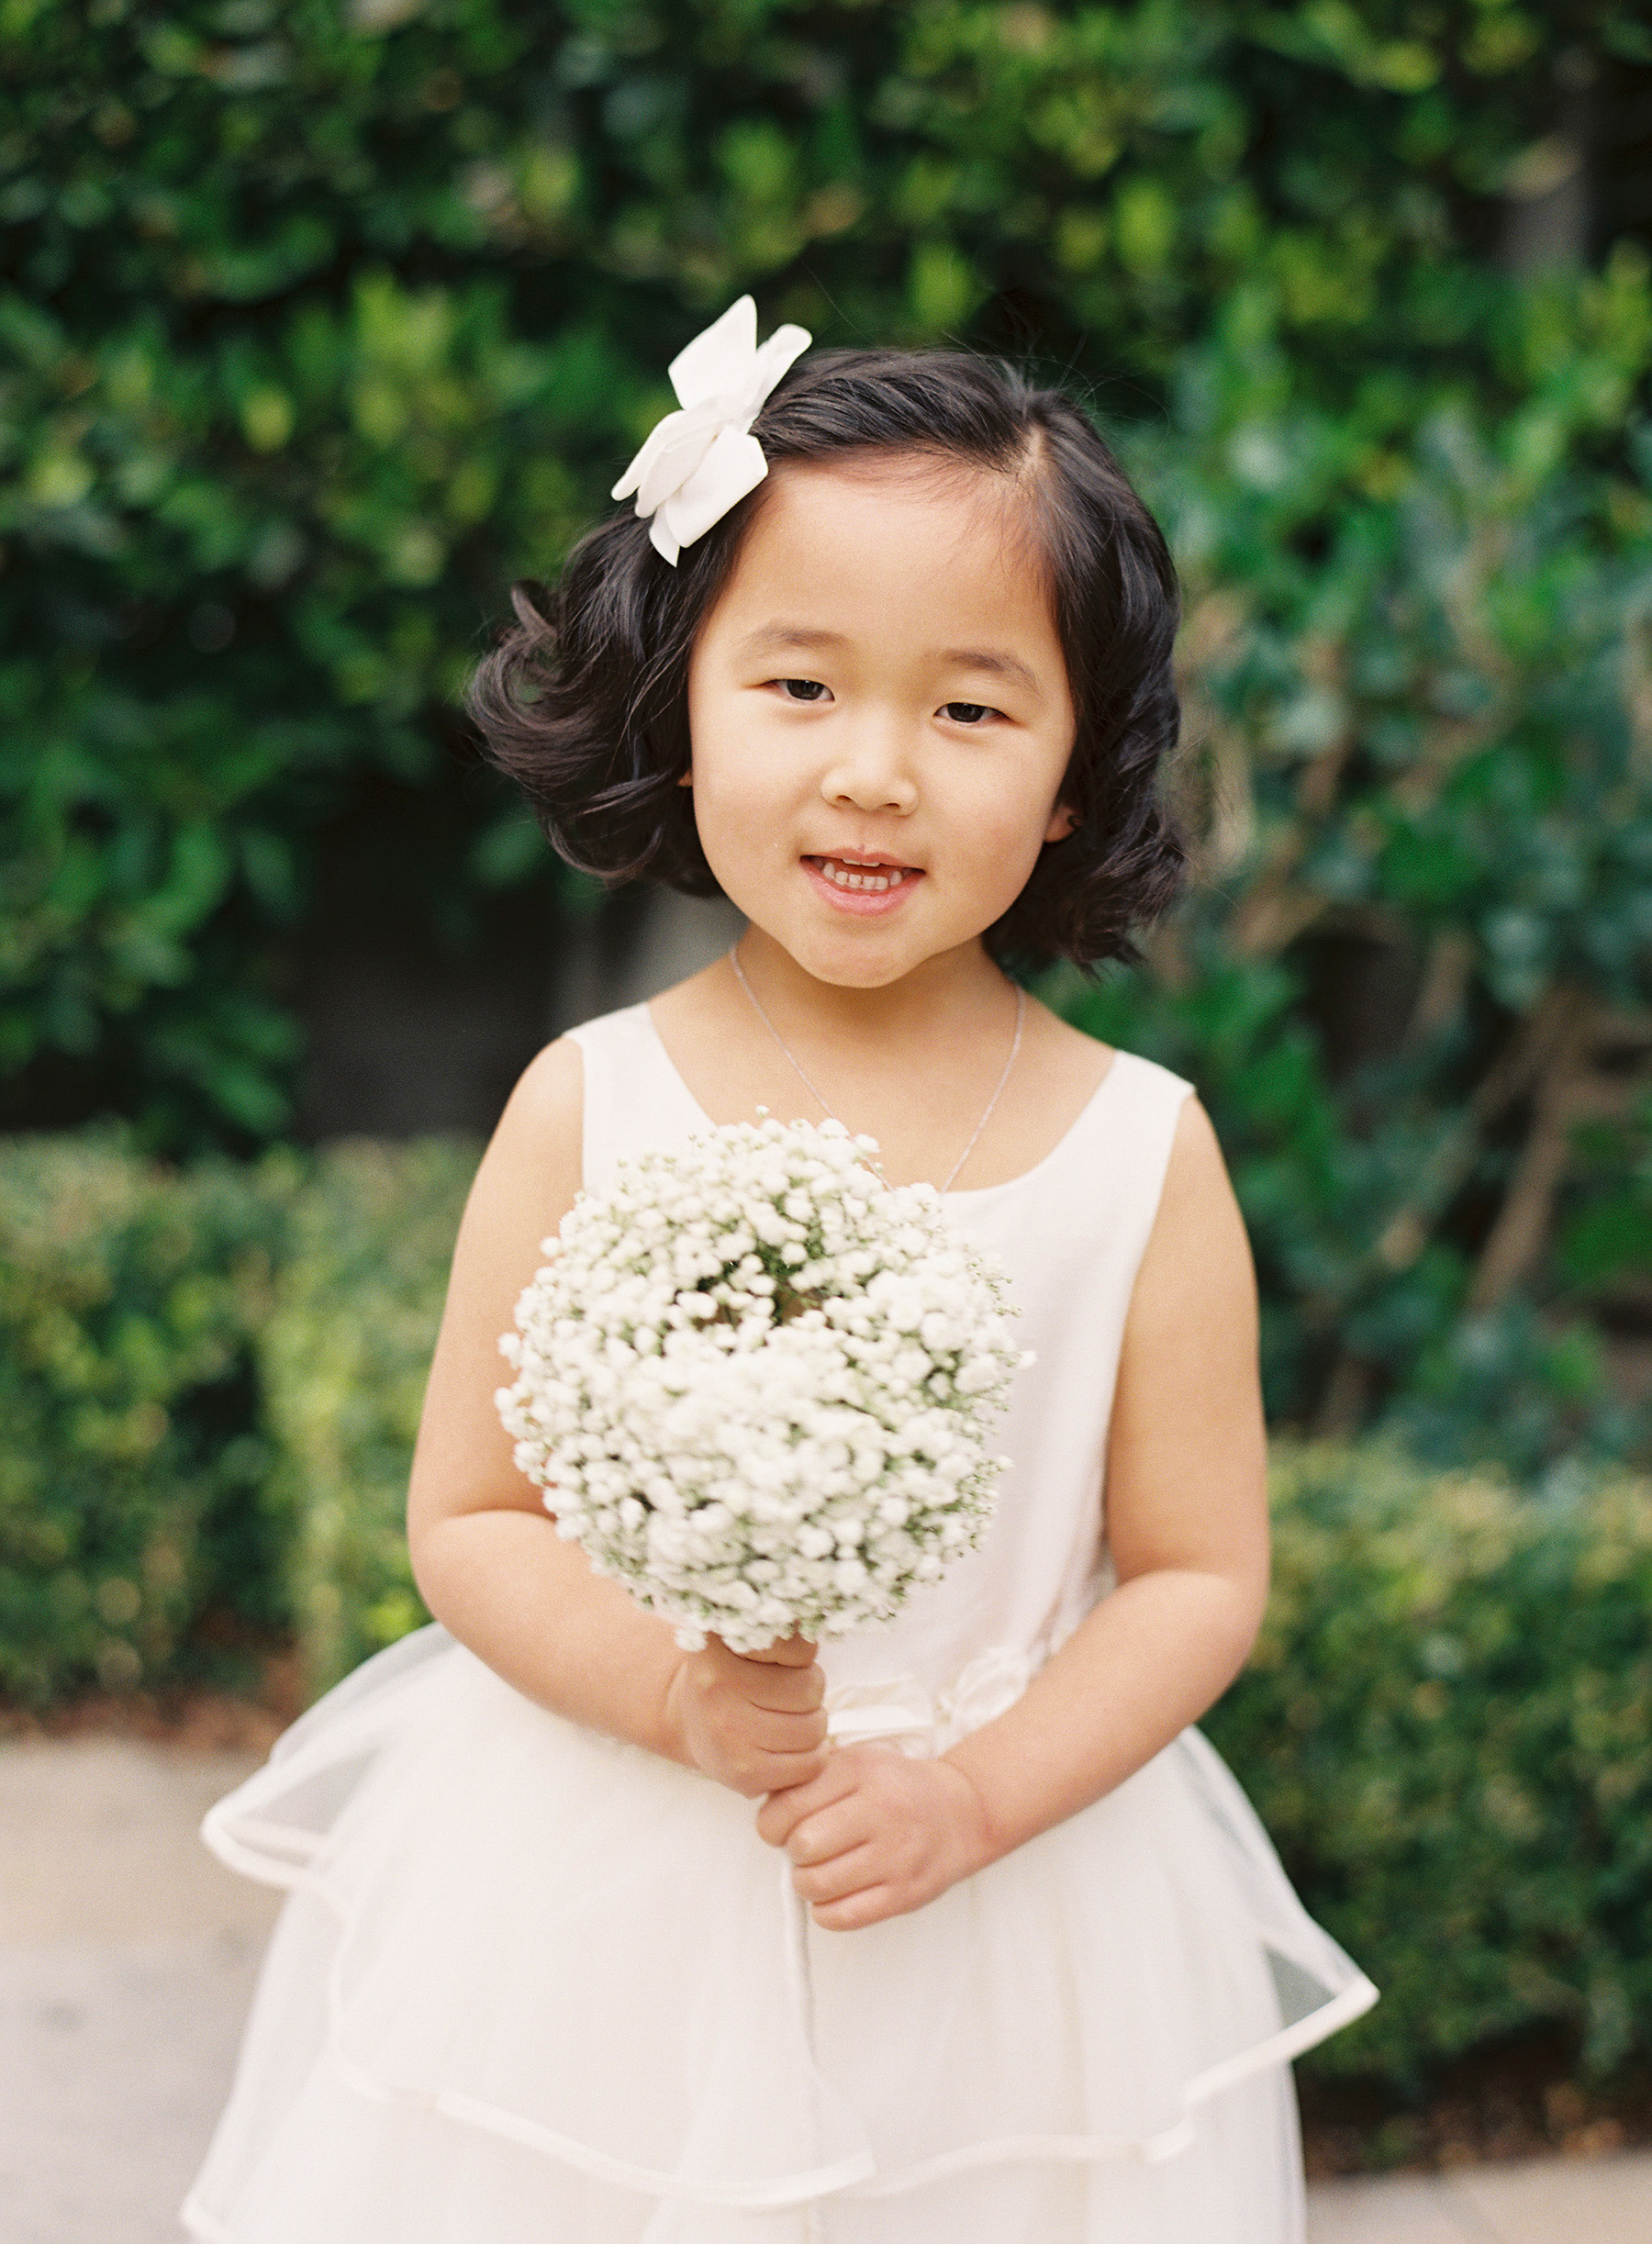 adorable hairstyle ideas for your flower girls | martha